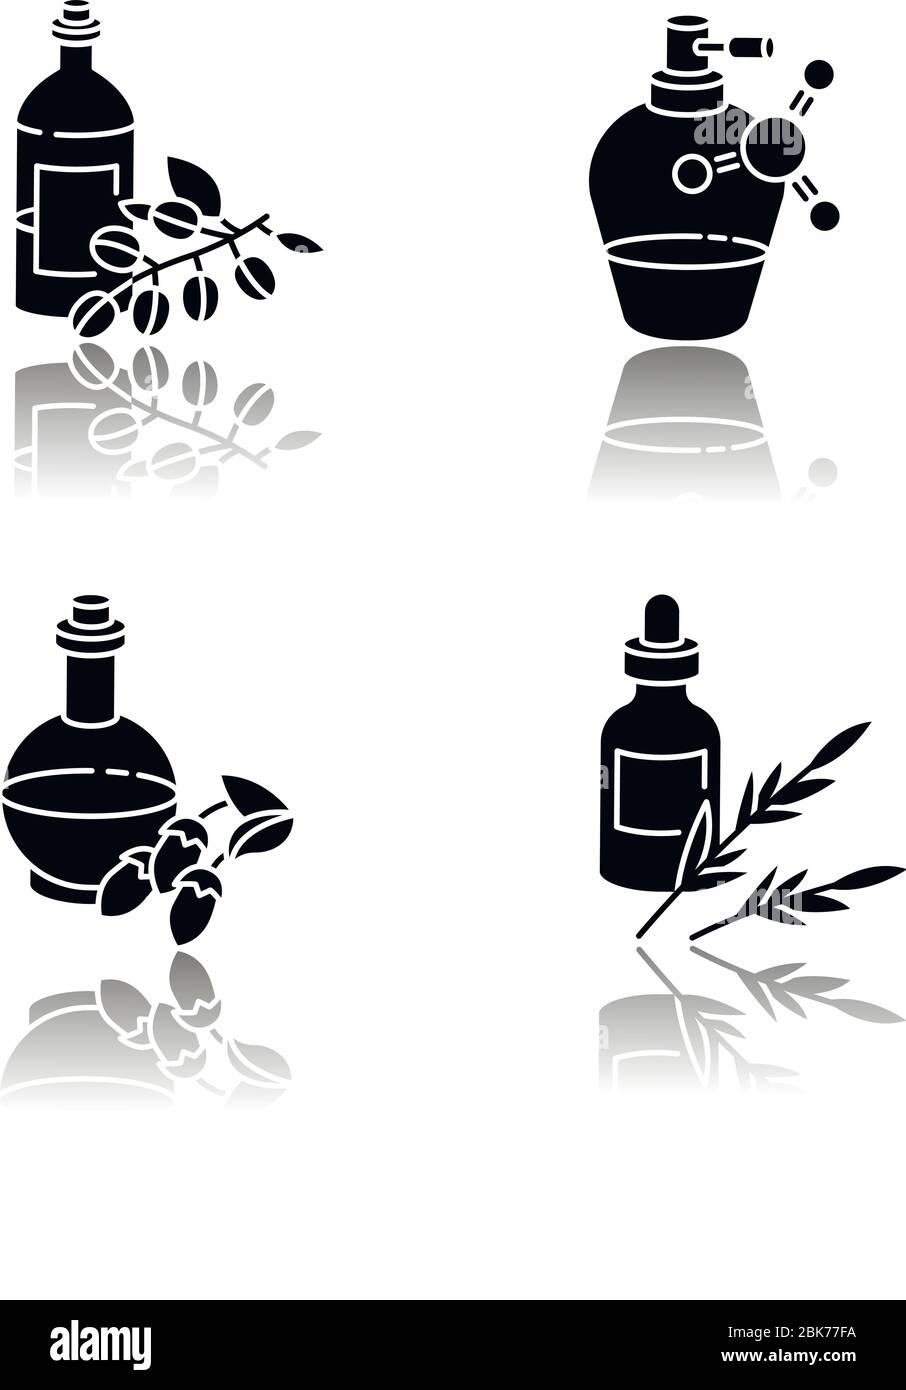 Hair oils drop shadow black glyph icons set. Antistatic sprayer in bottle. B5 panthenol ointment. B7 biotic cosmetic product. Liquid silicon. Isolated Stock Vector